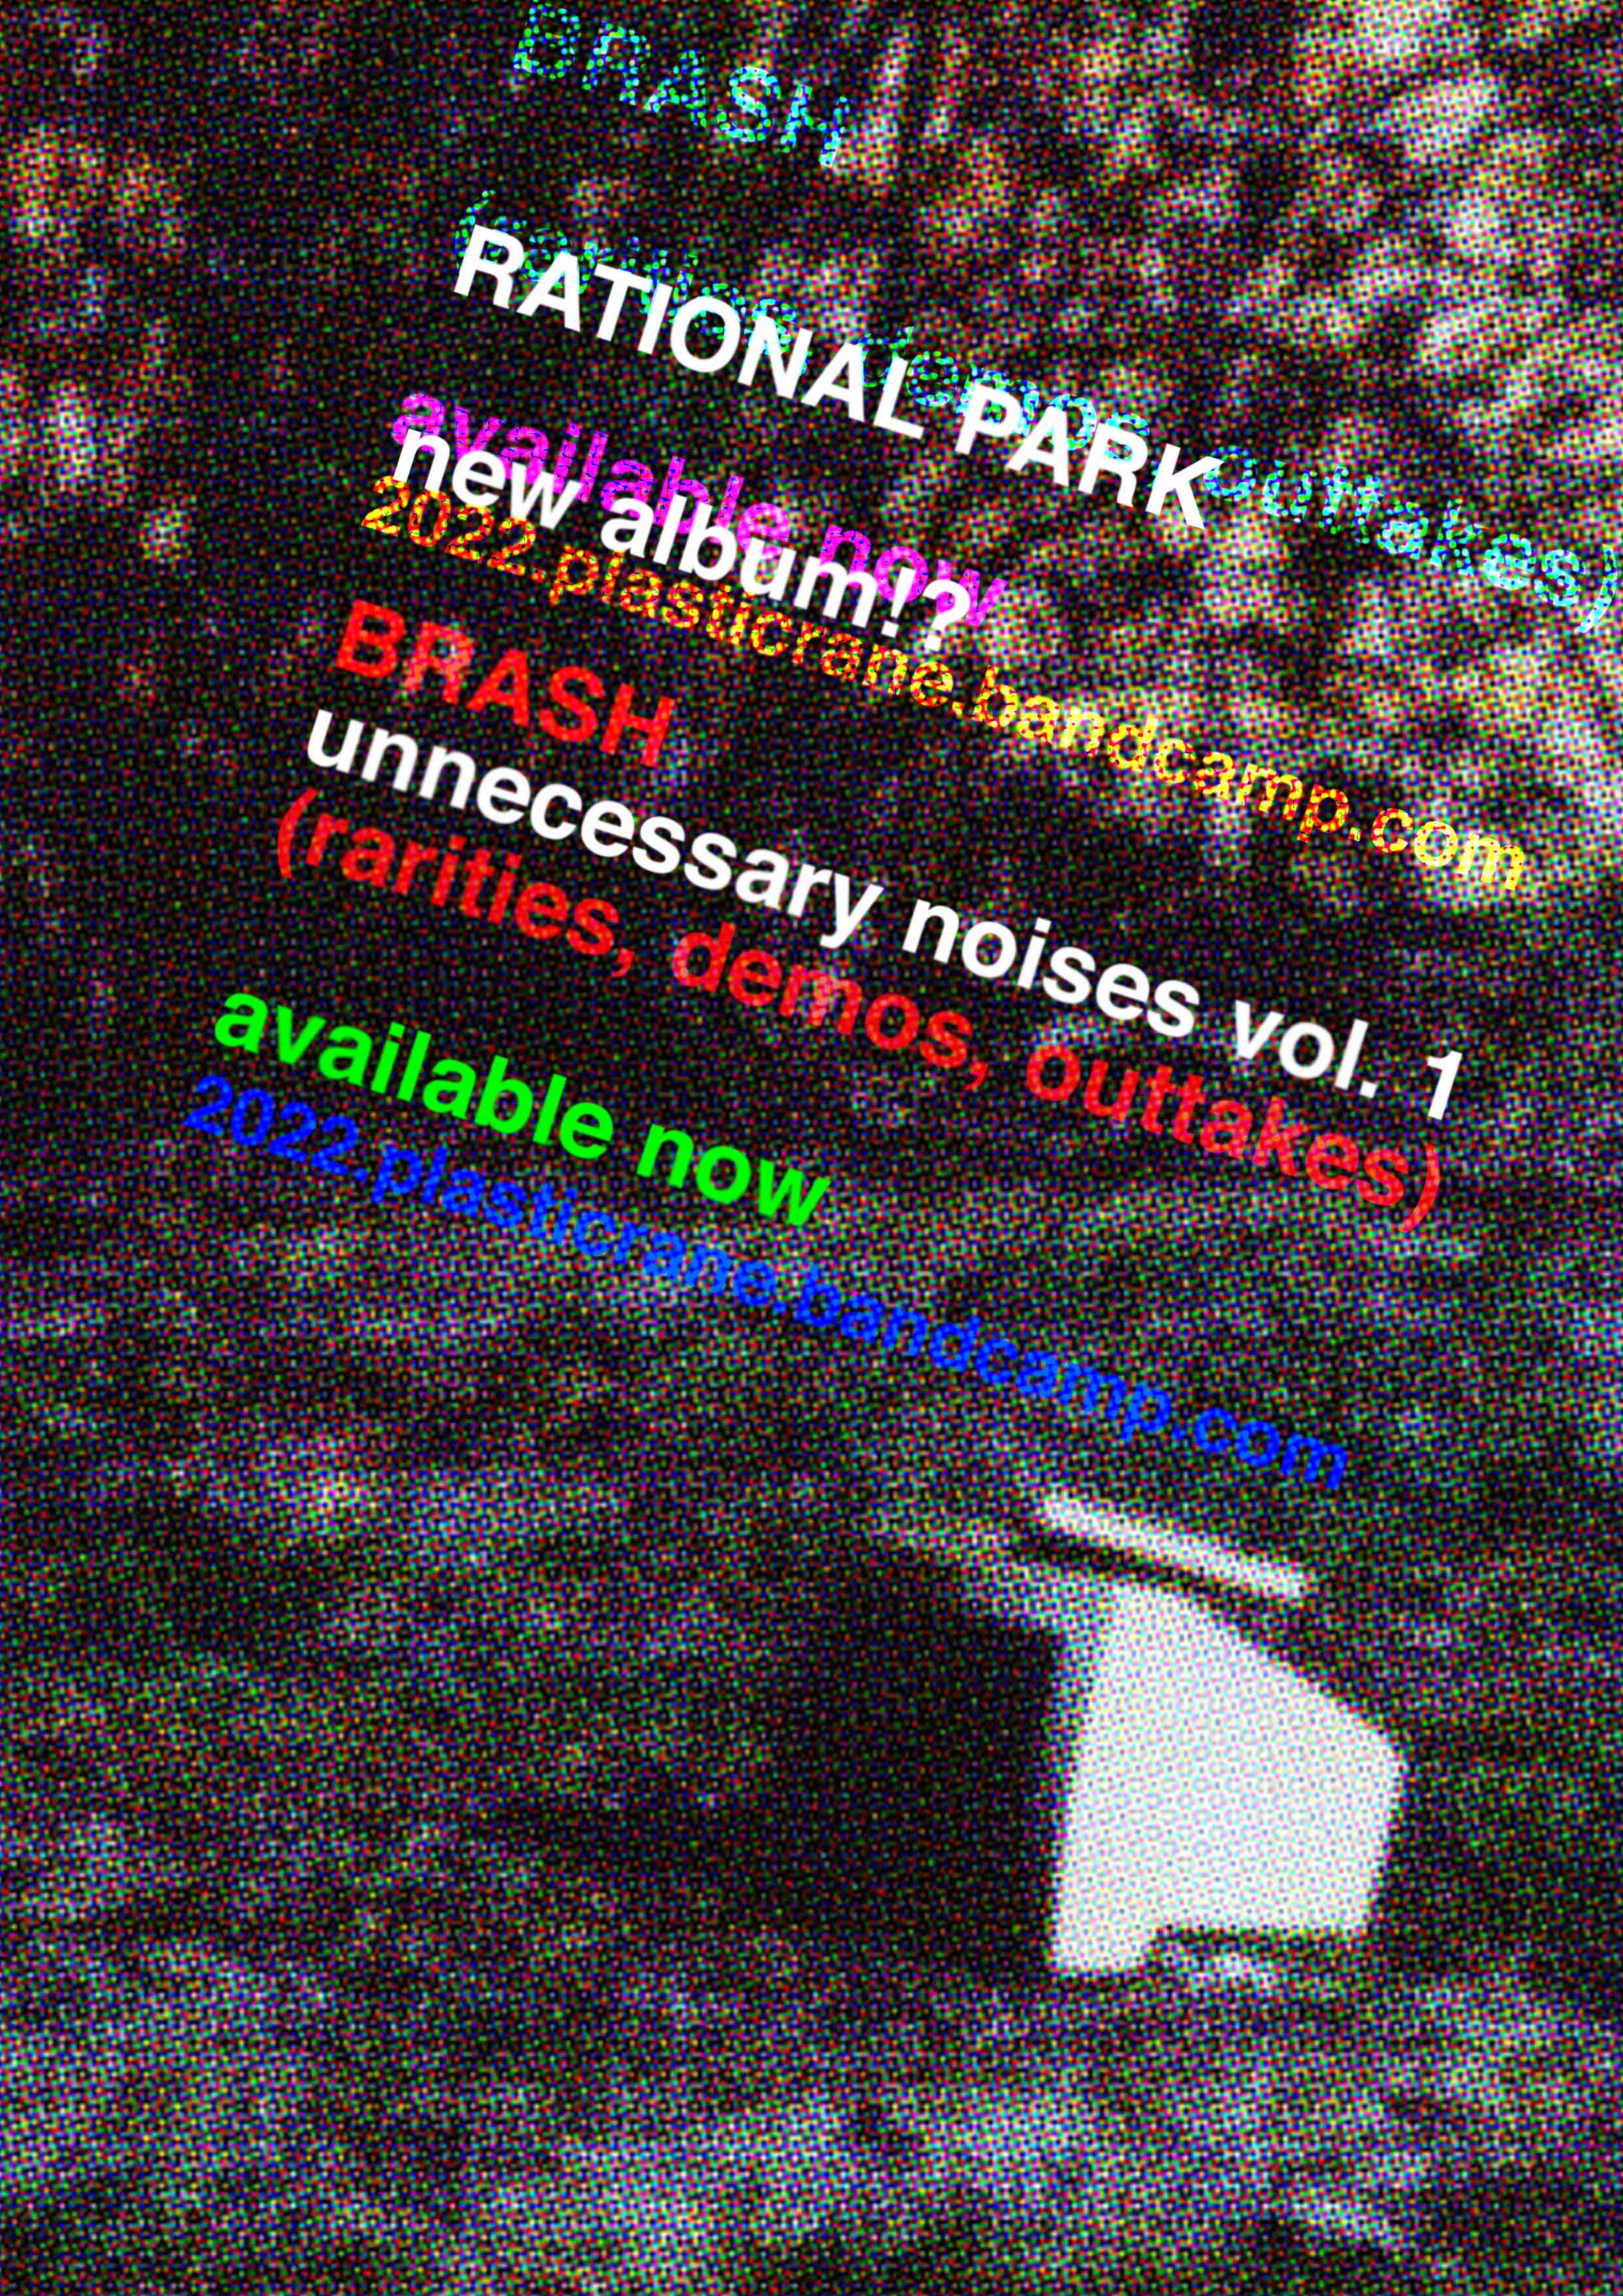 Rational Park. Brash, album of outtakes and rarities. Poster. 2022